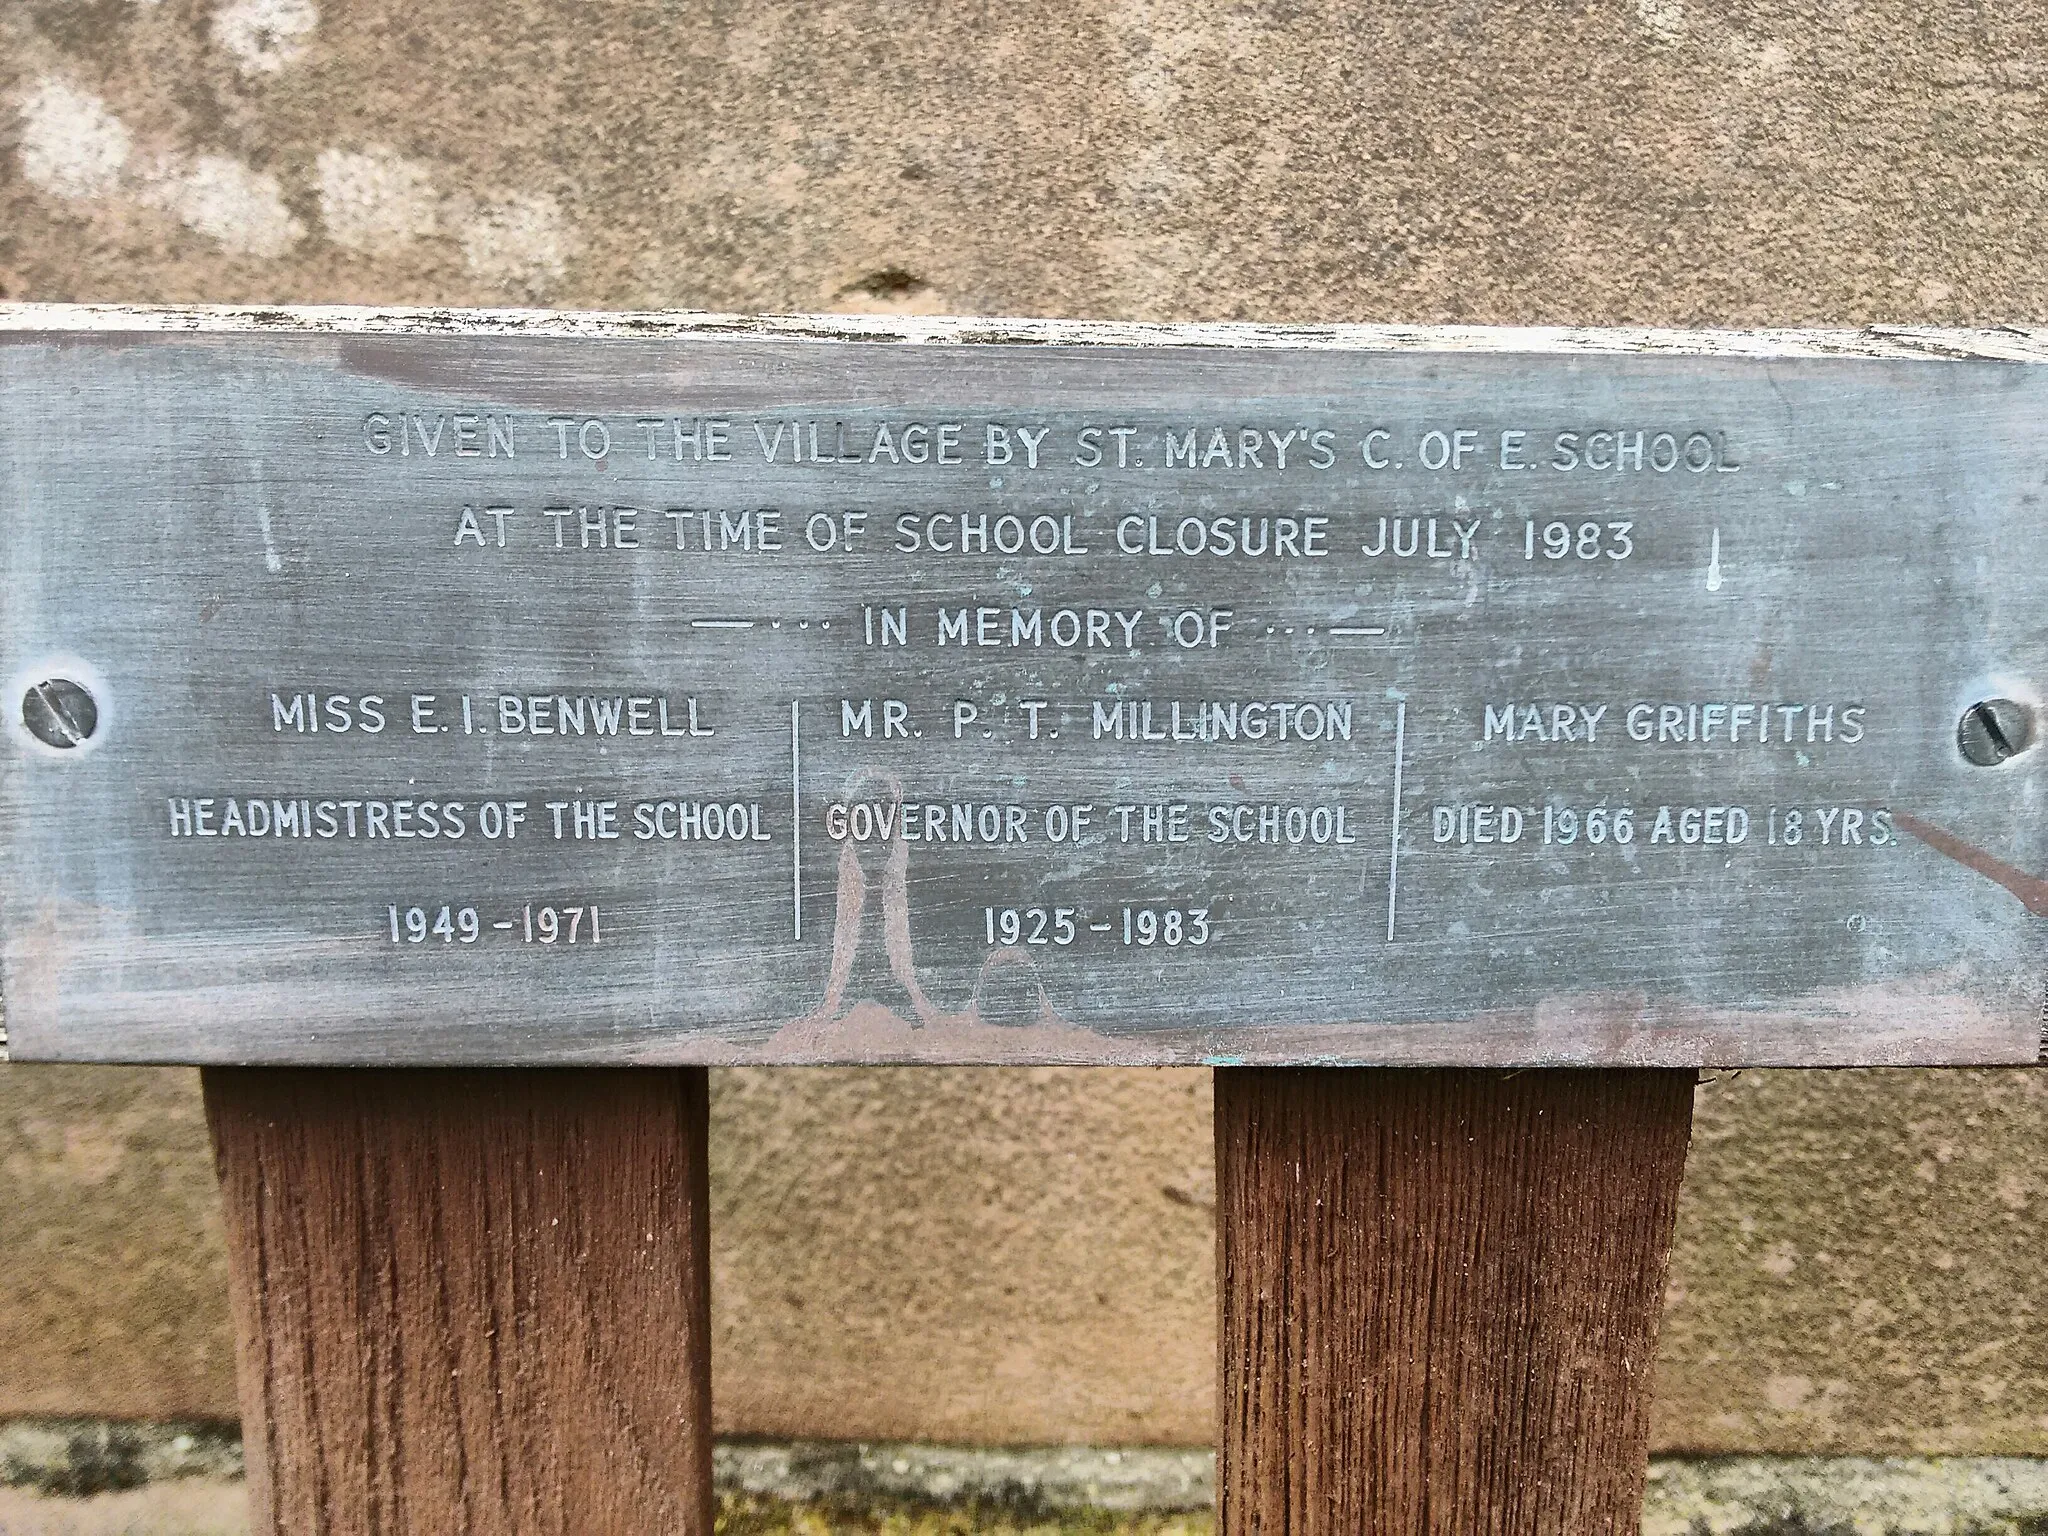 Photo showing: GIVEN TO THE VILLAGE BY ST MARY'S C. OF E. SCHOOL
AT THE TIME OF SCHOOL CLOSURE JULY 1983

IN MEMORY OF

MISS E. I. BENWELL…